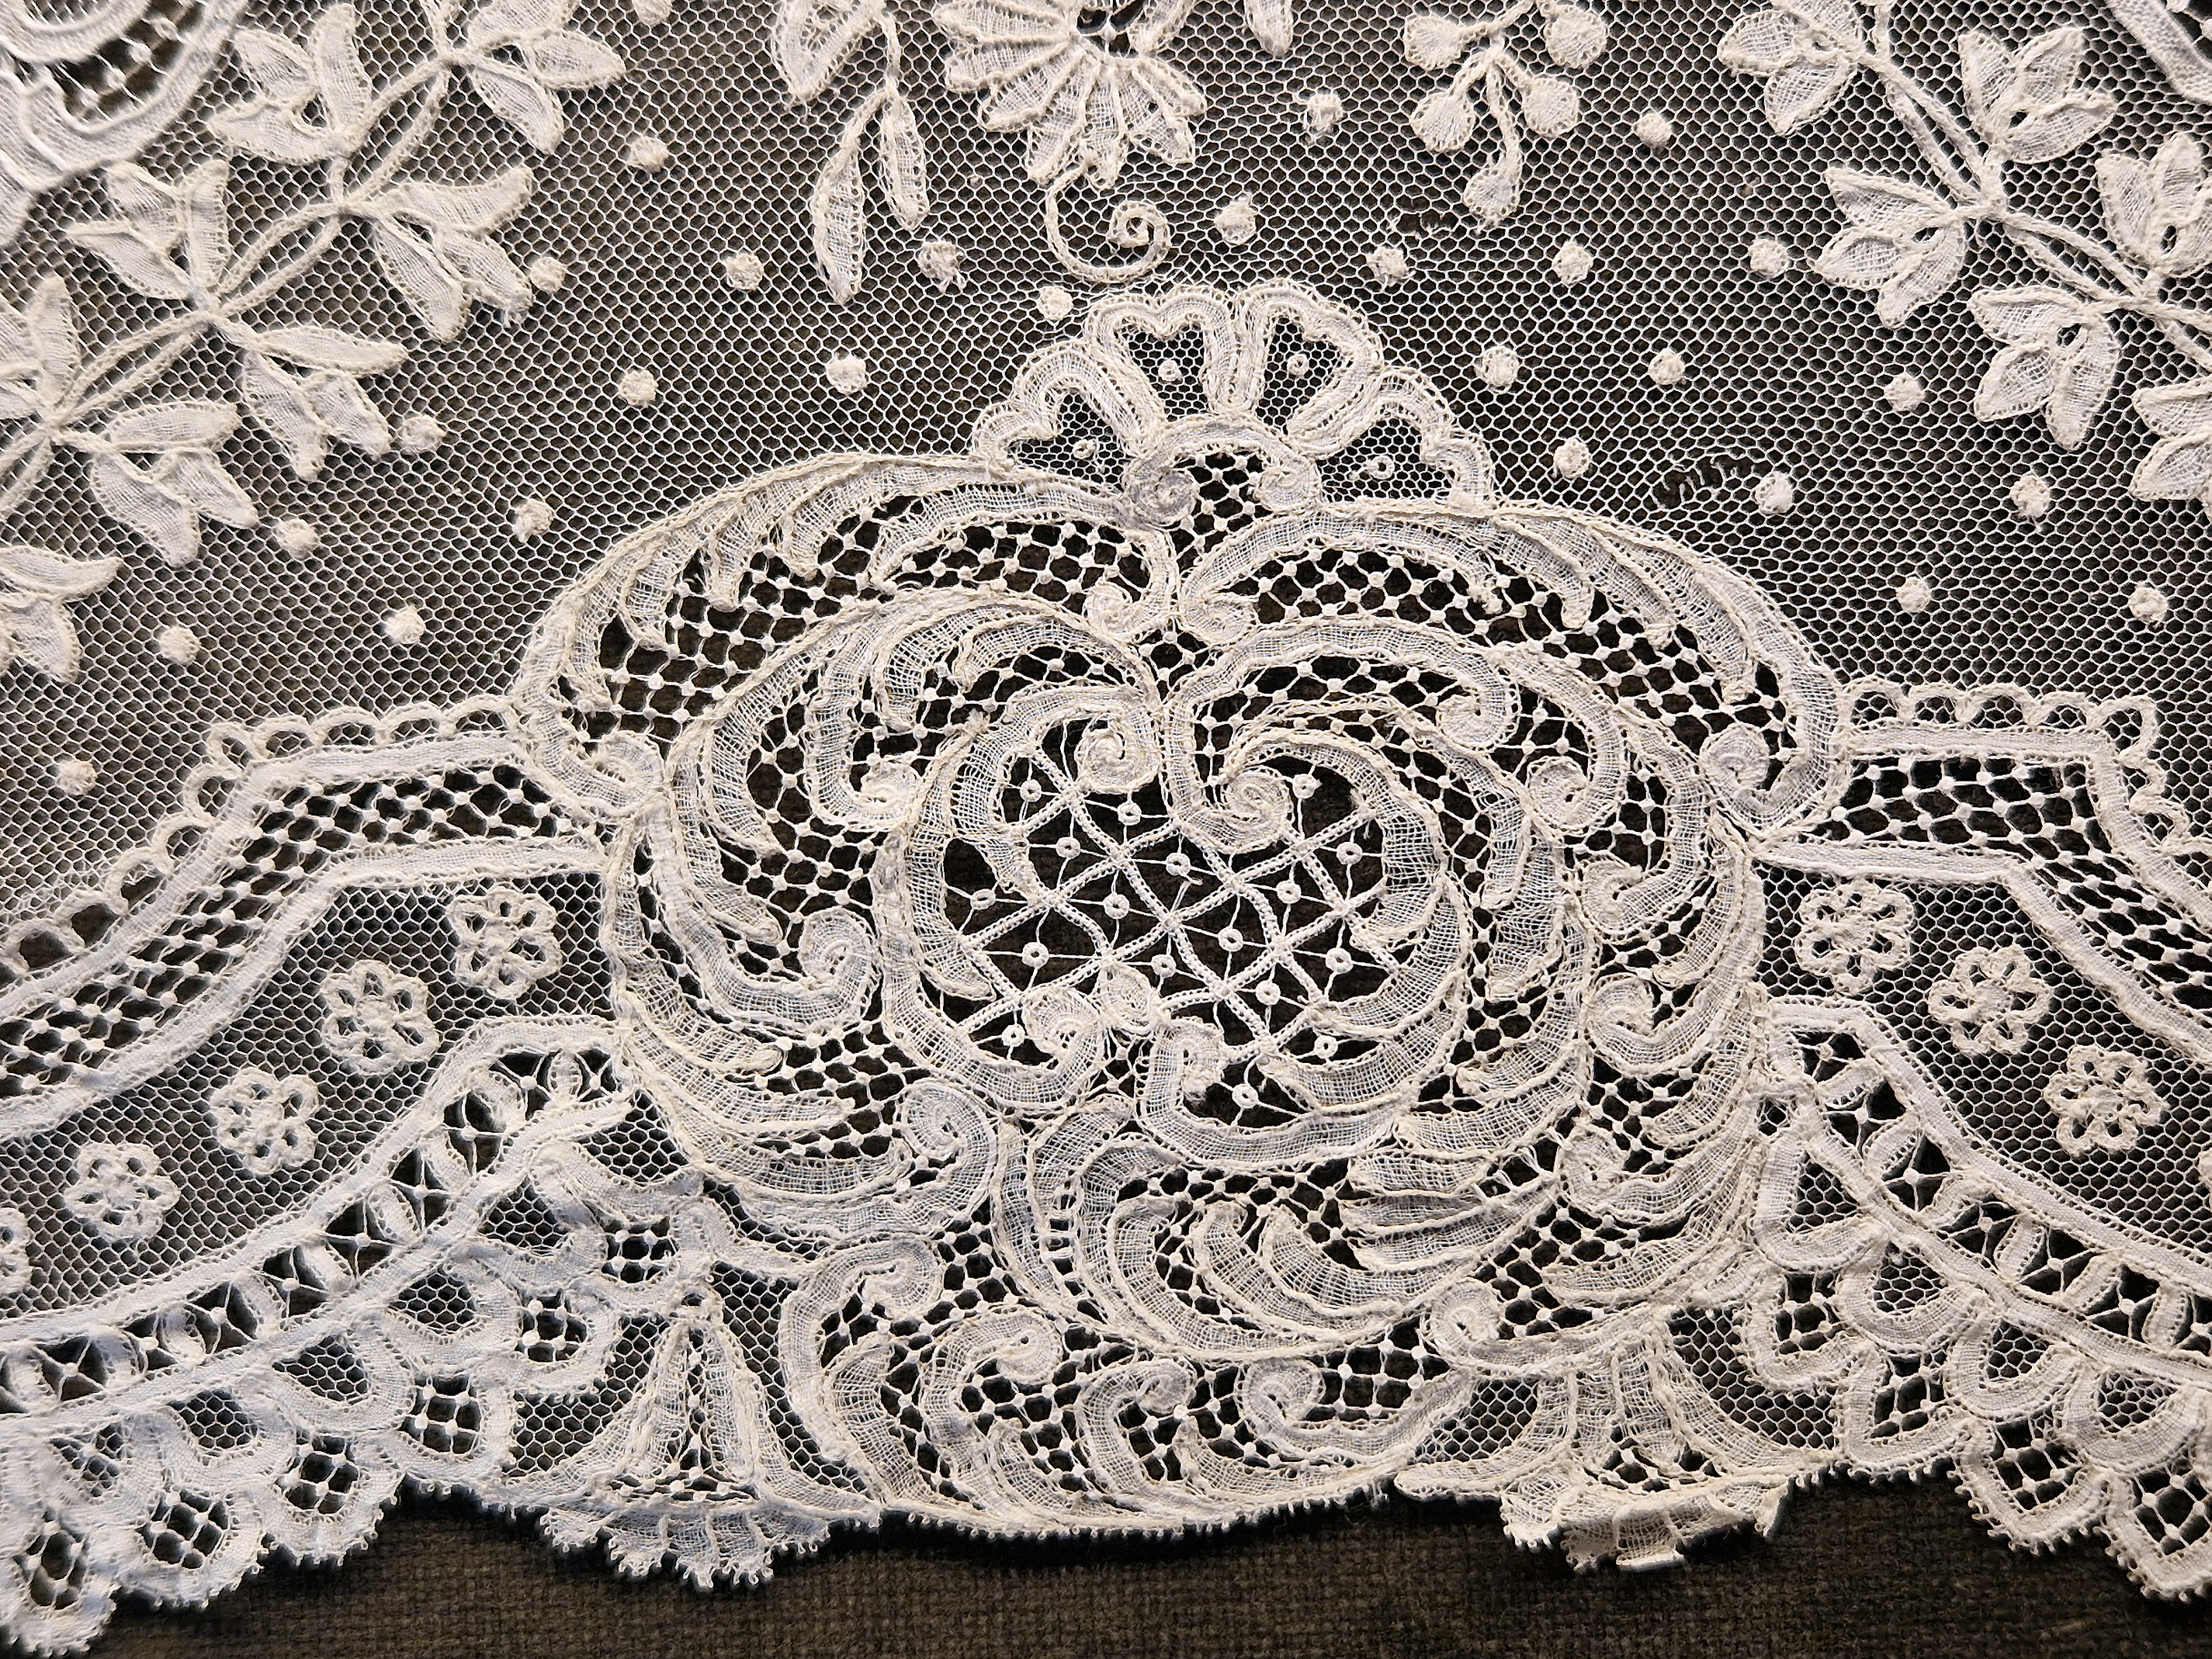 Brussels duchesse lace appliquéd on machine-made tulle